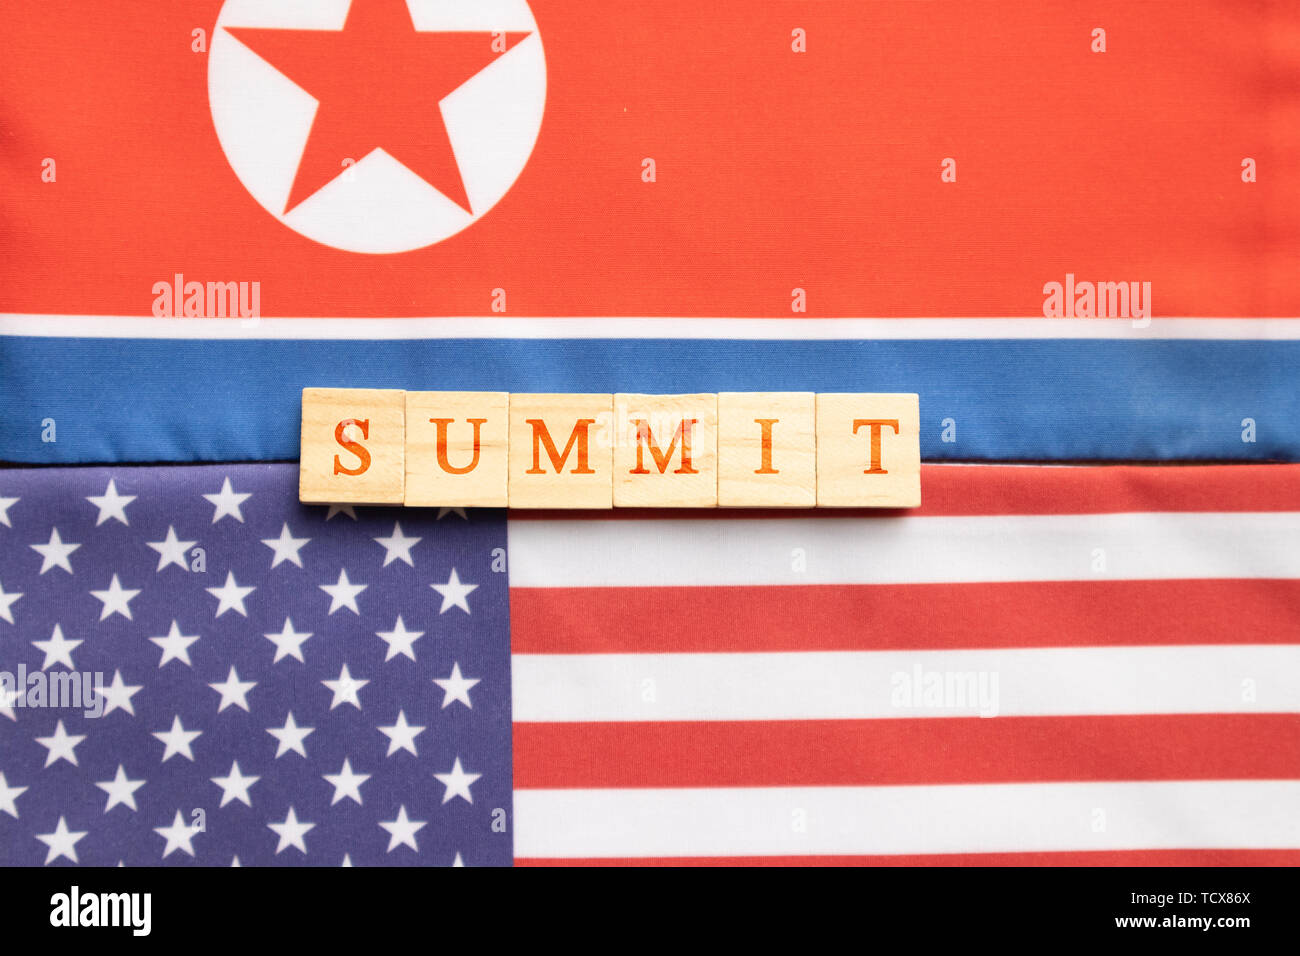 Concept of bilateral relations of USA and North Korea showing with flag and summit in wooden block letters Stock Photo